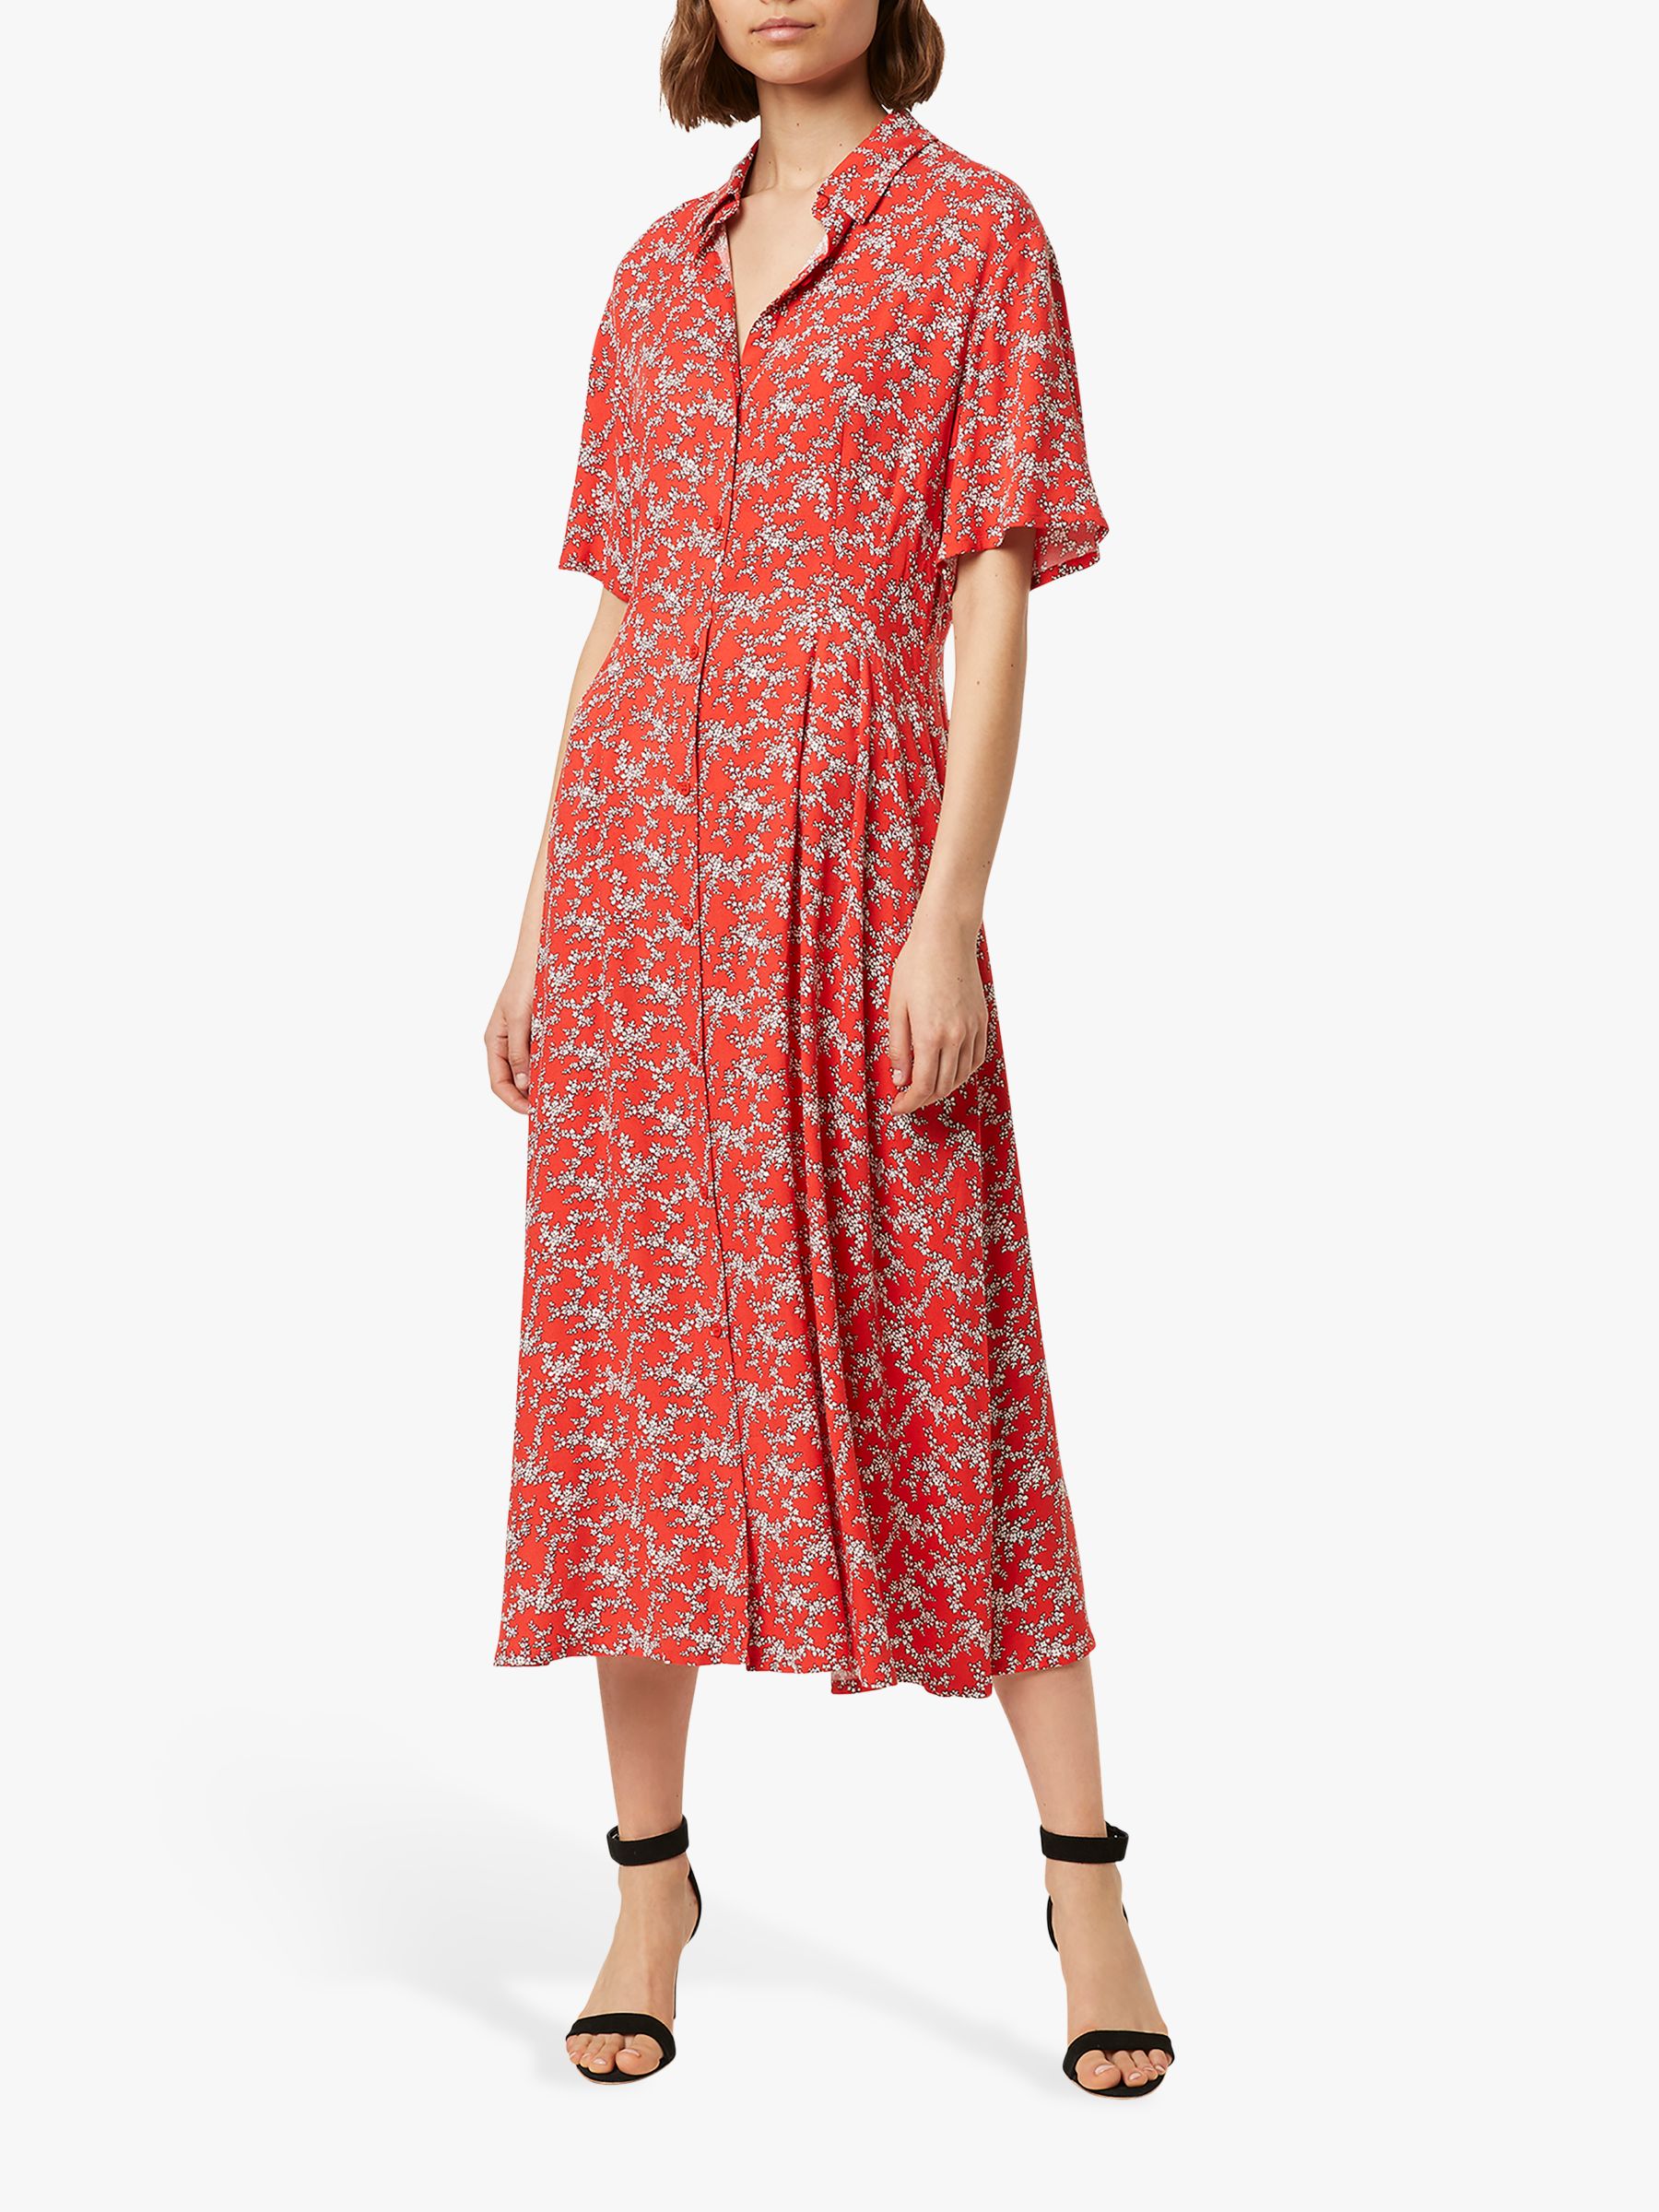 French Connection Cerisier Short Sleeve Shirt Dress, Flame/Multi